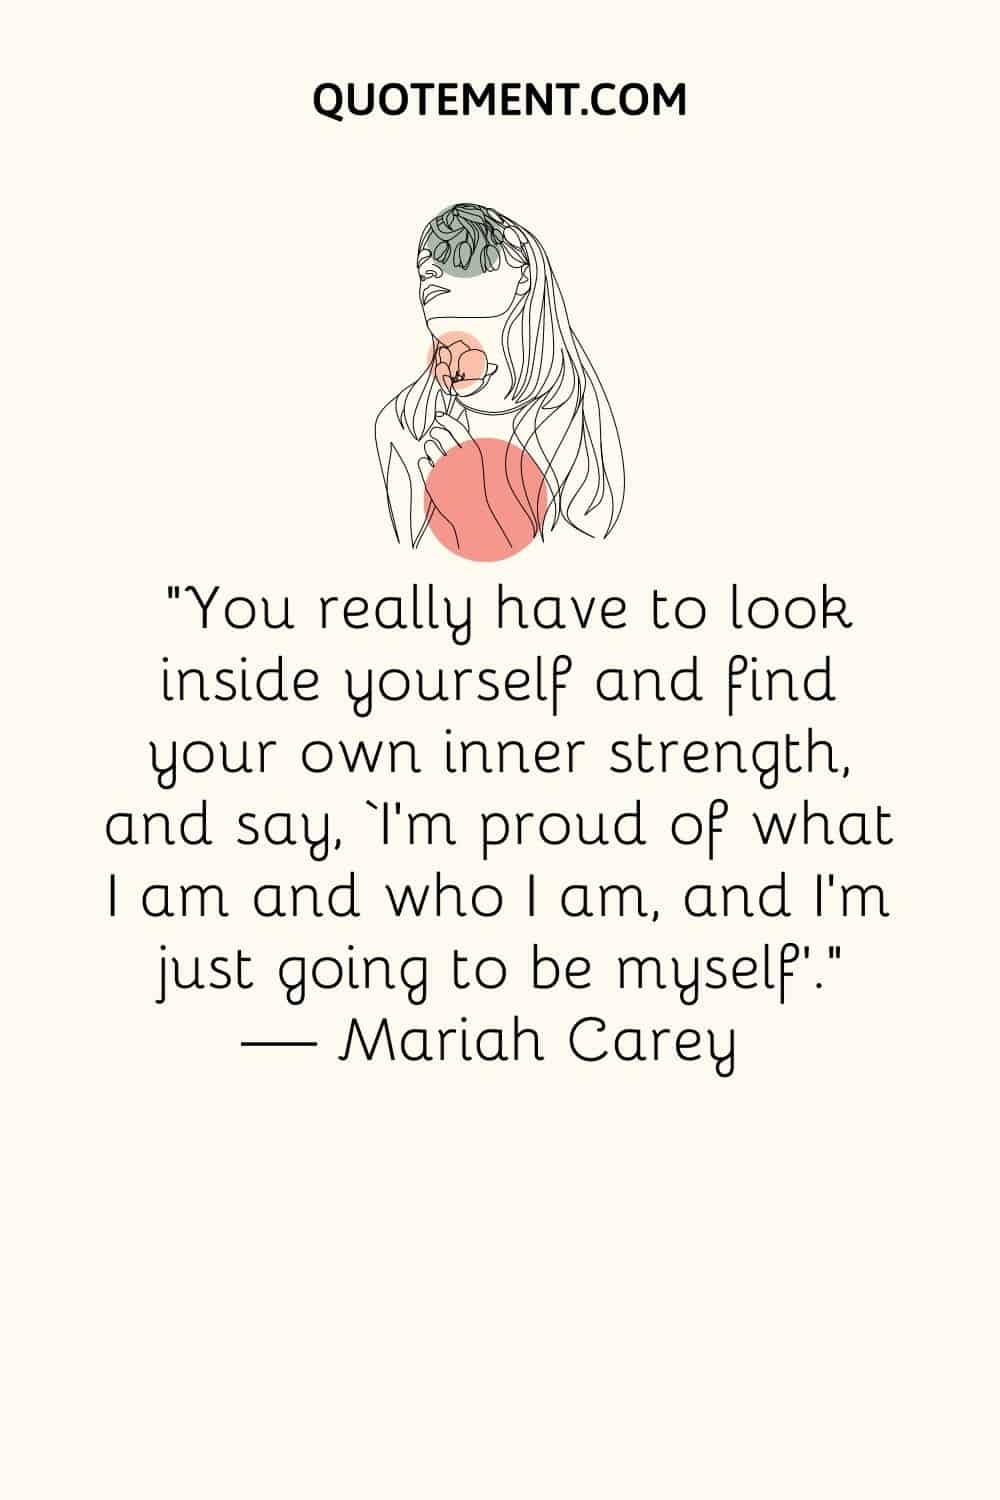 “You really have to look inside yourself and find your own inner strength, and say, ‘I’m proud of what I am and who I am, and I’m just going to be myself’.” ― Mariah Carey